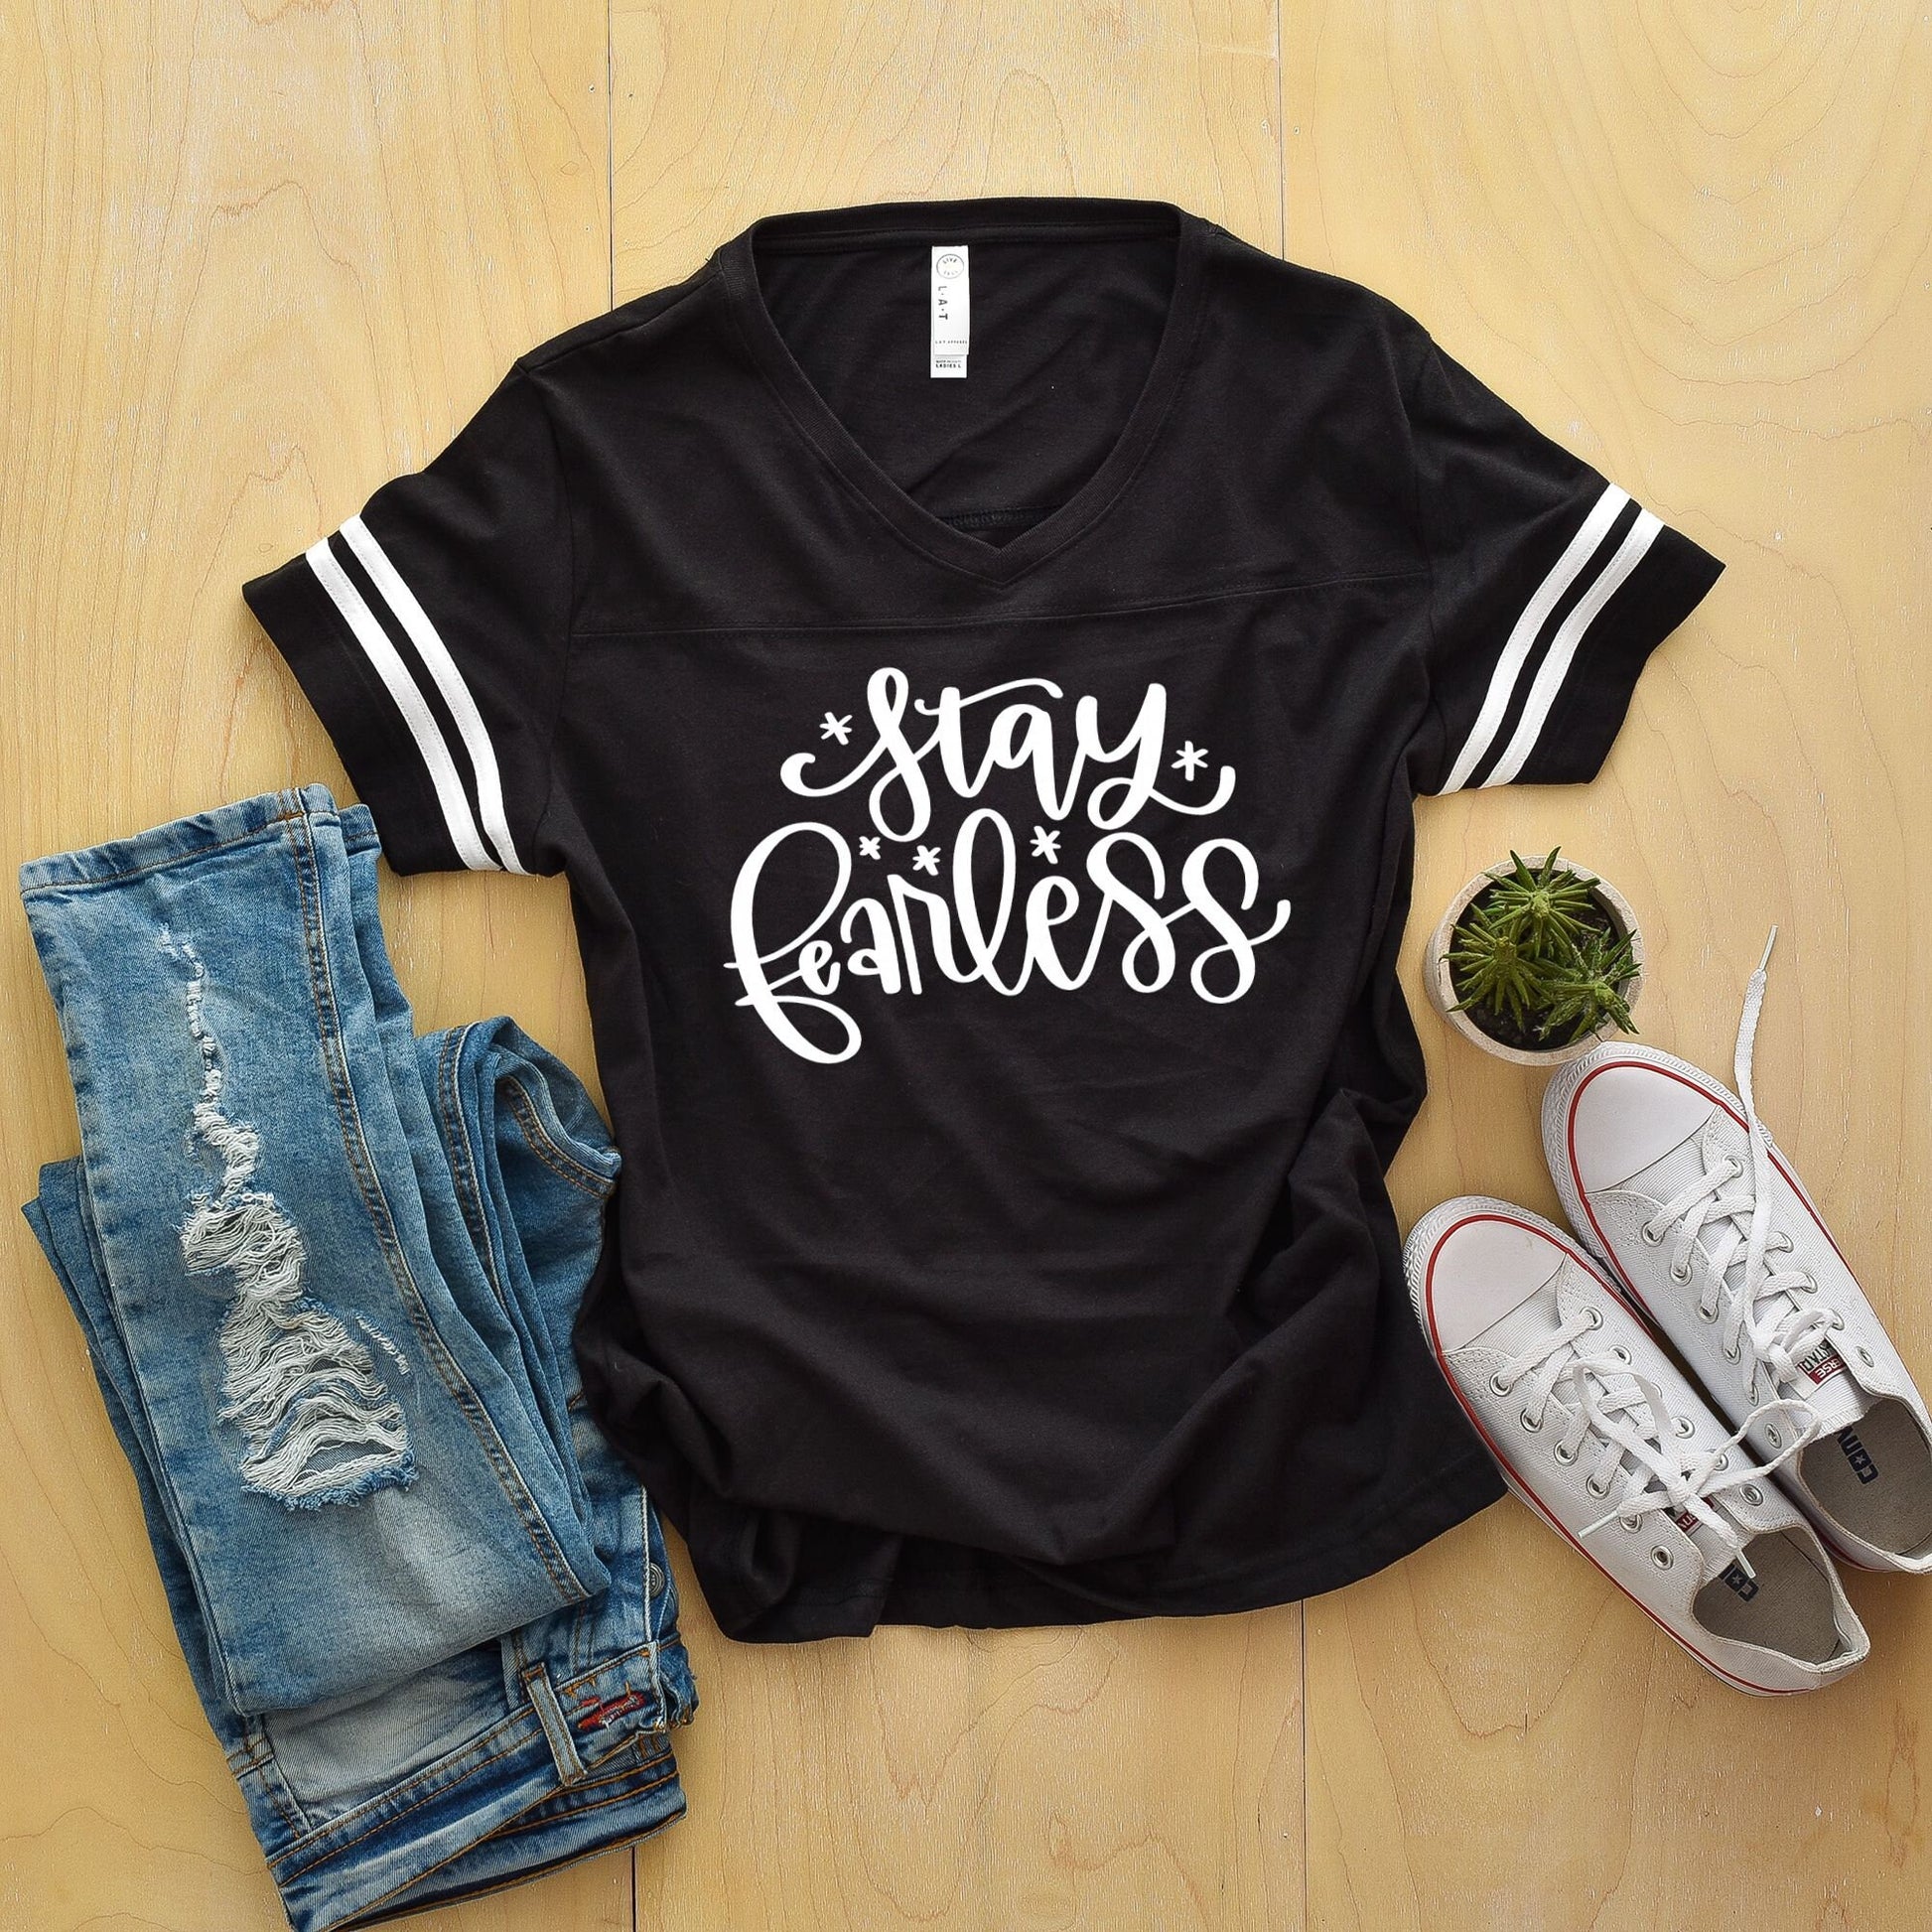 Stay Fearless Football or Baseball Raglan t-shirts - Mommy and Me shirts - Mommy and Son Matching Shirts